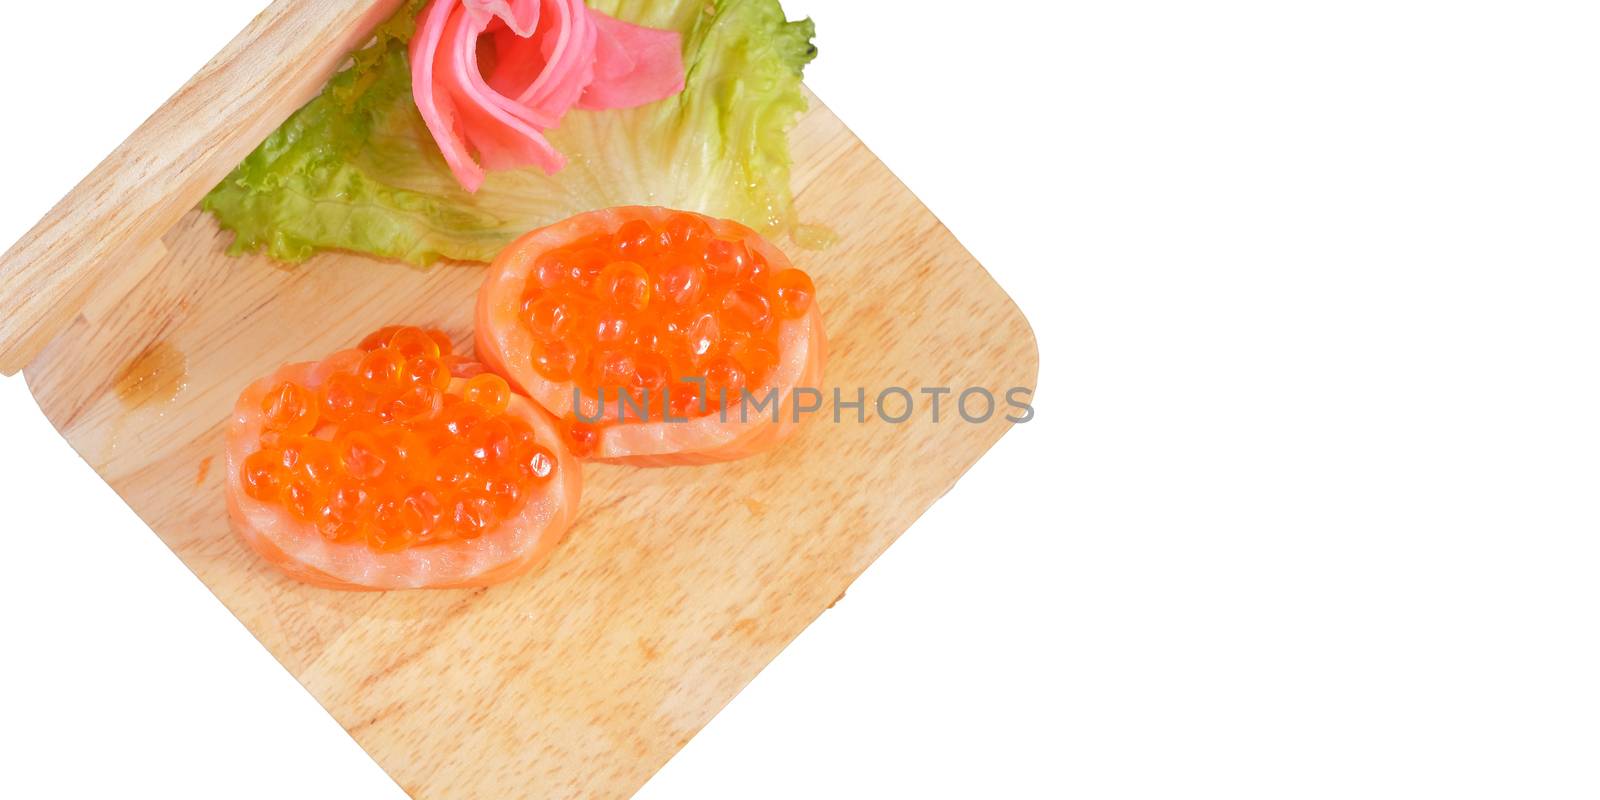 Japanese Cuisine - Sushi Roll on wood plate in white background by Surasak